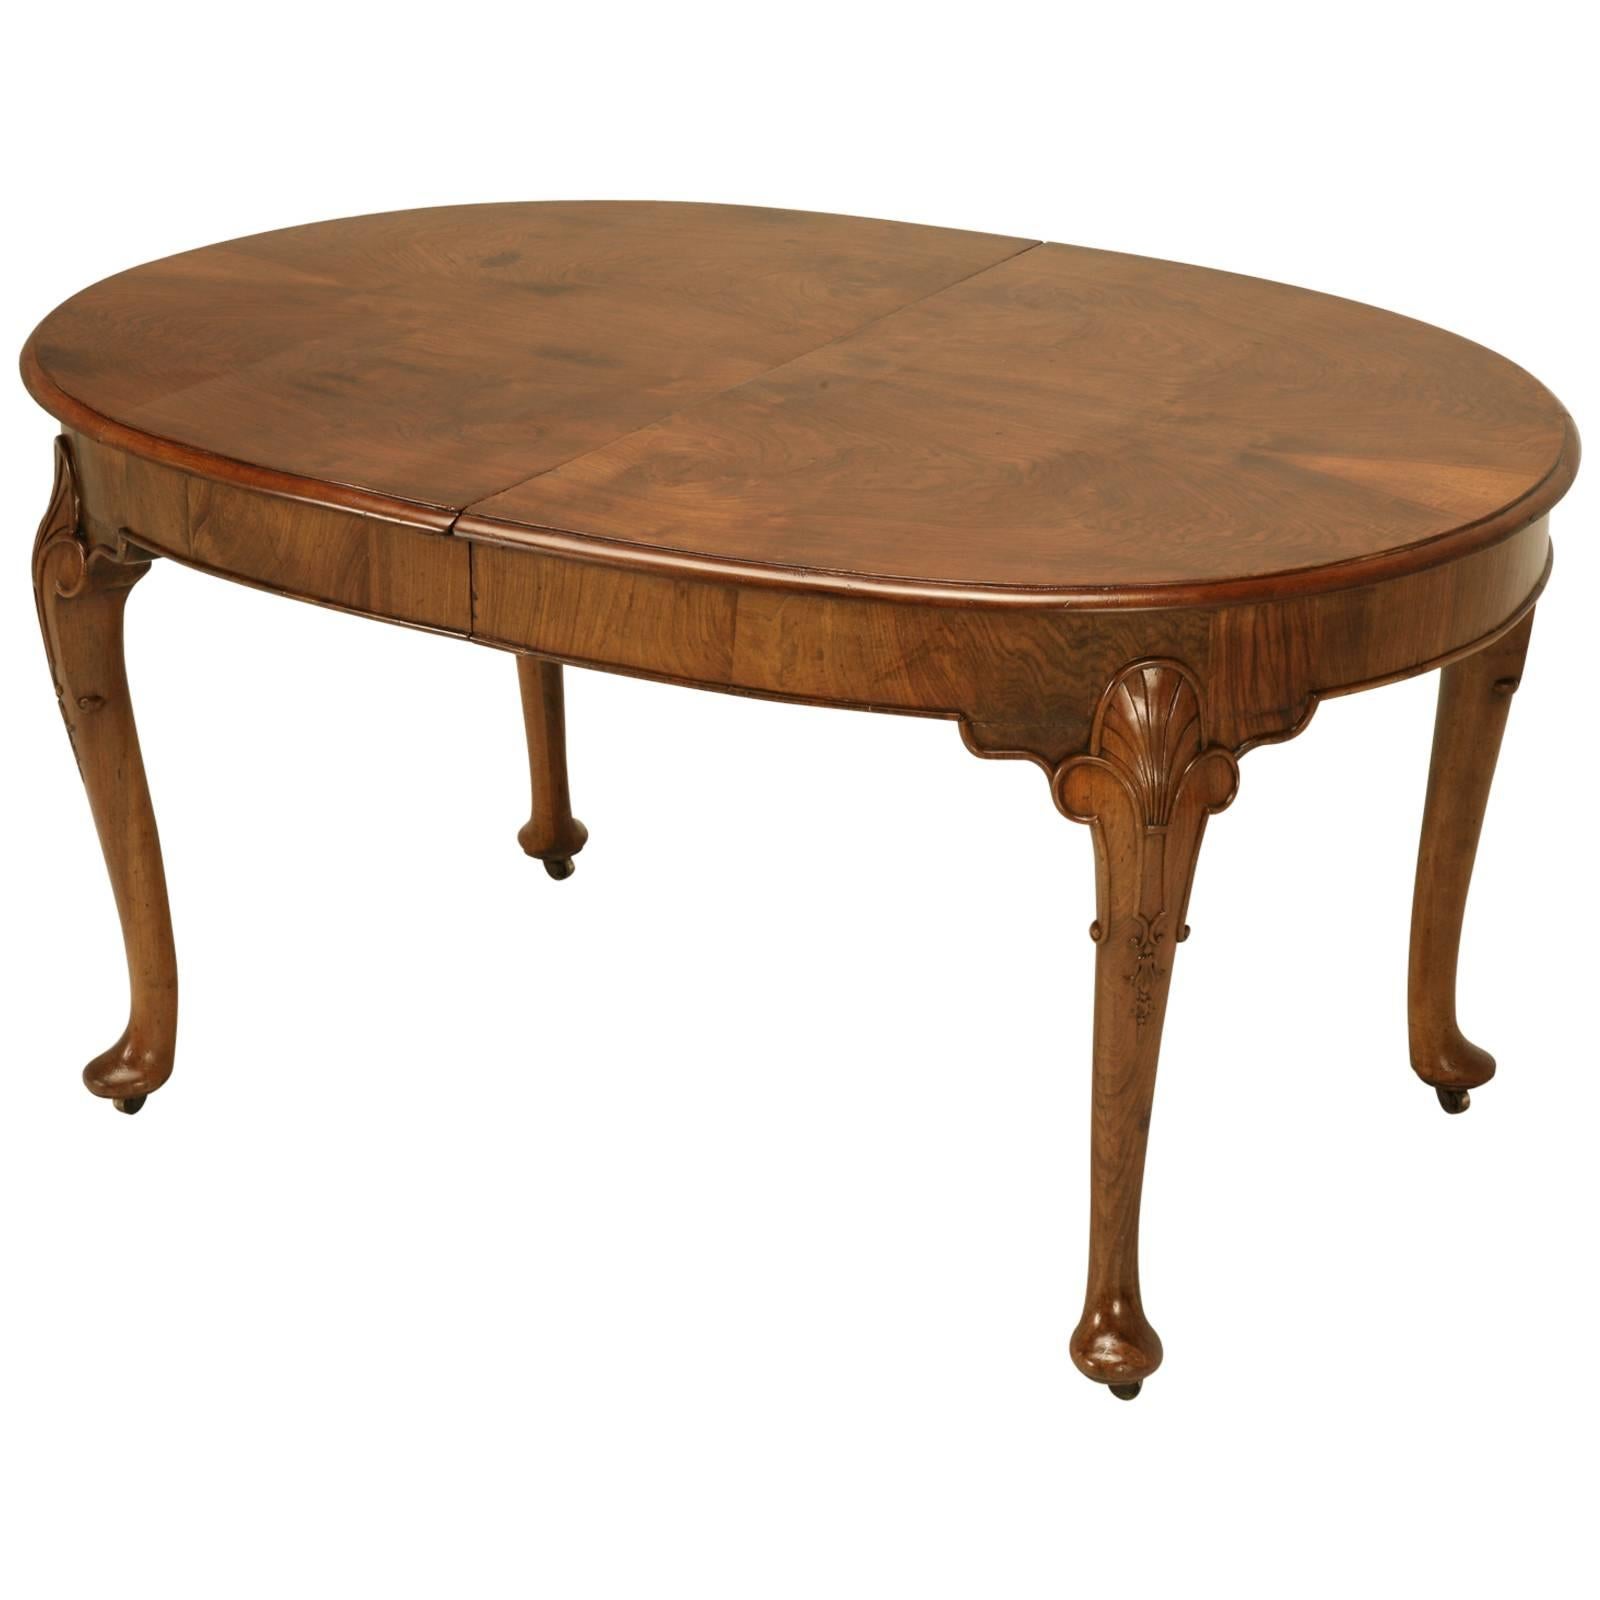 English Chippendale Dining Table in Burl Walnut